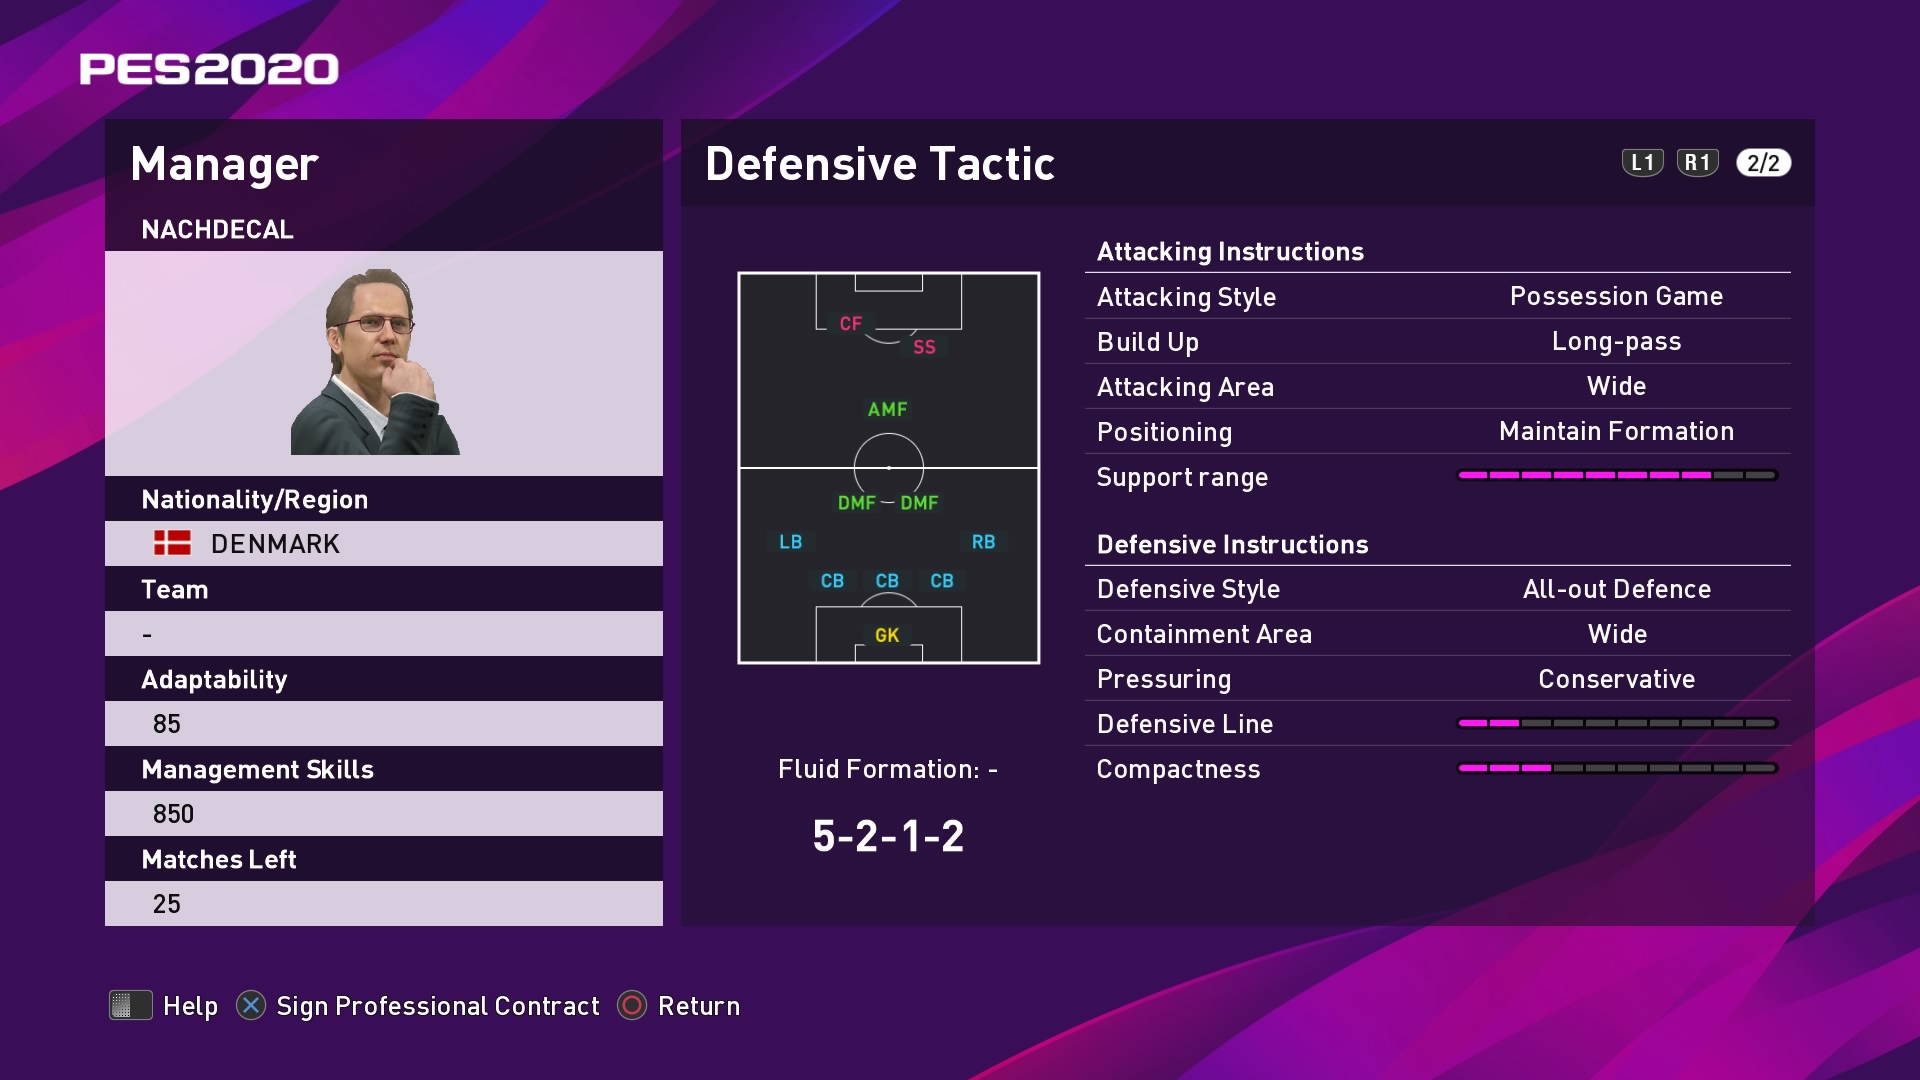 Nachdecal Defensive Tactic in PES 2020 myClub